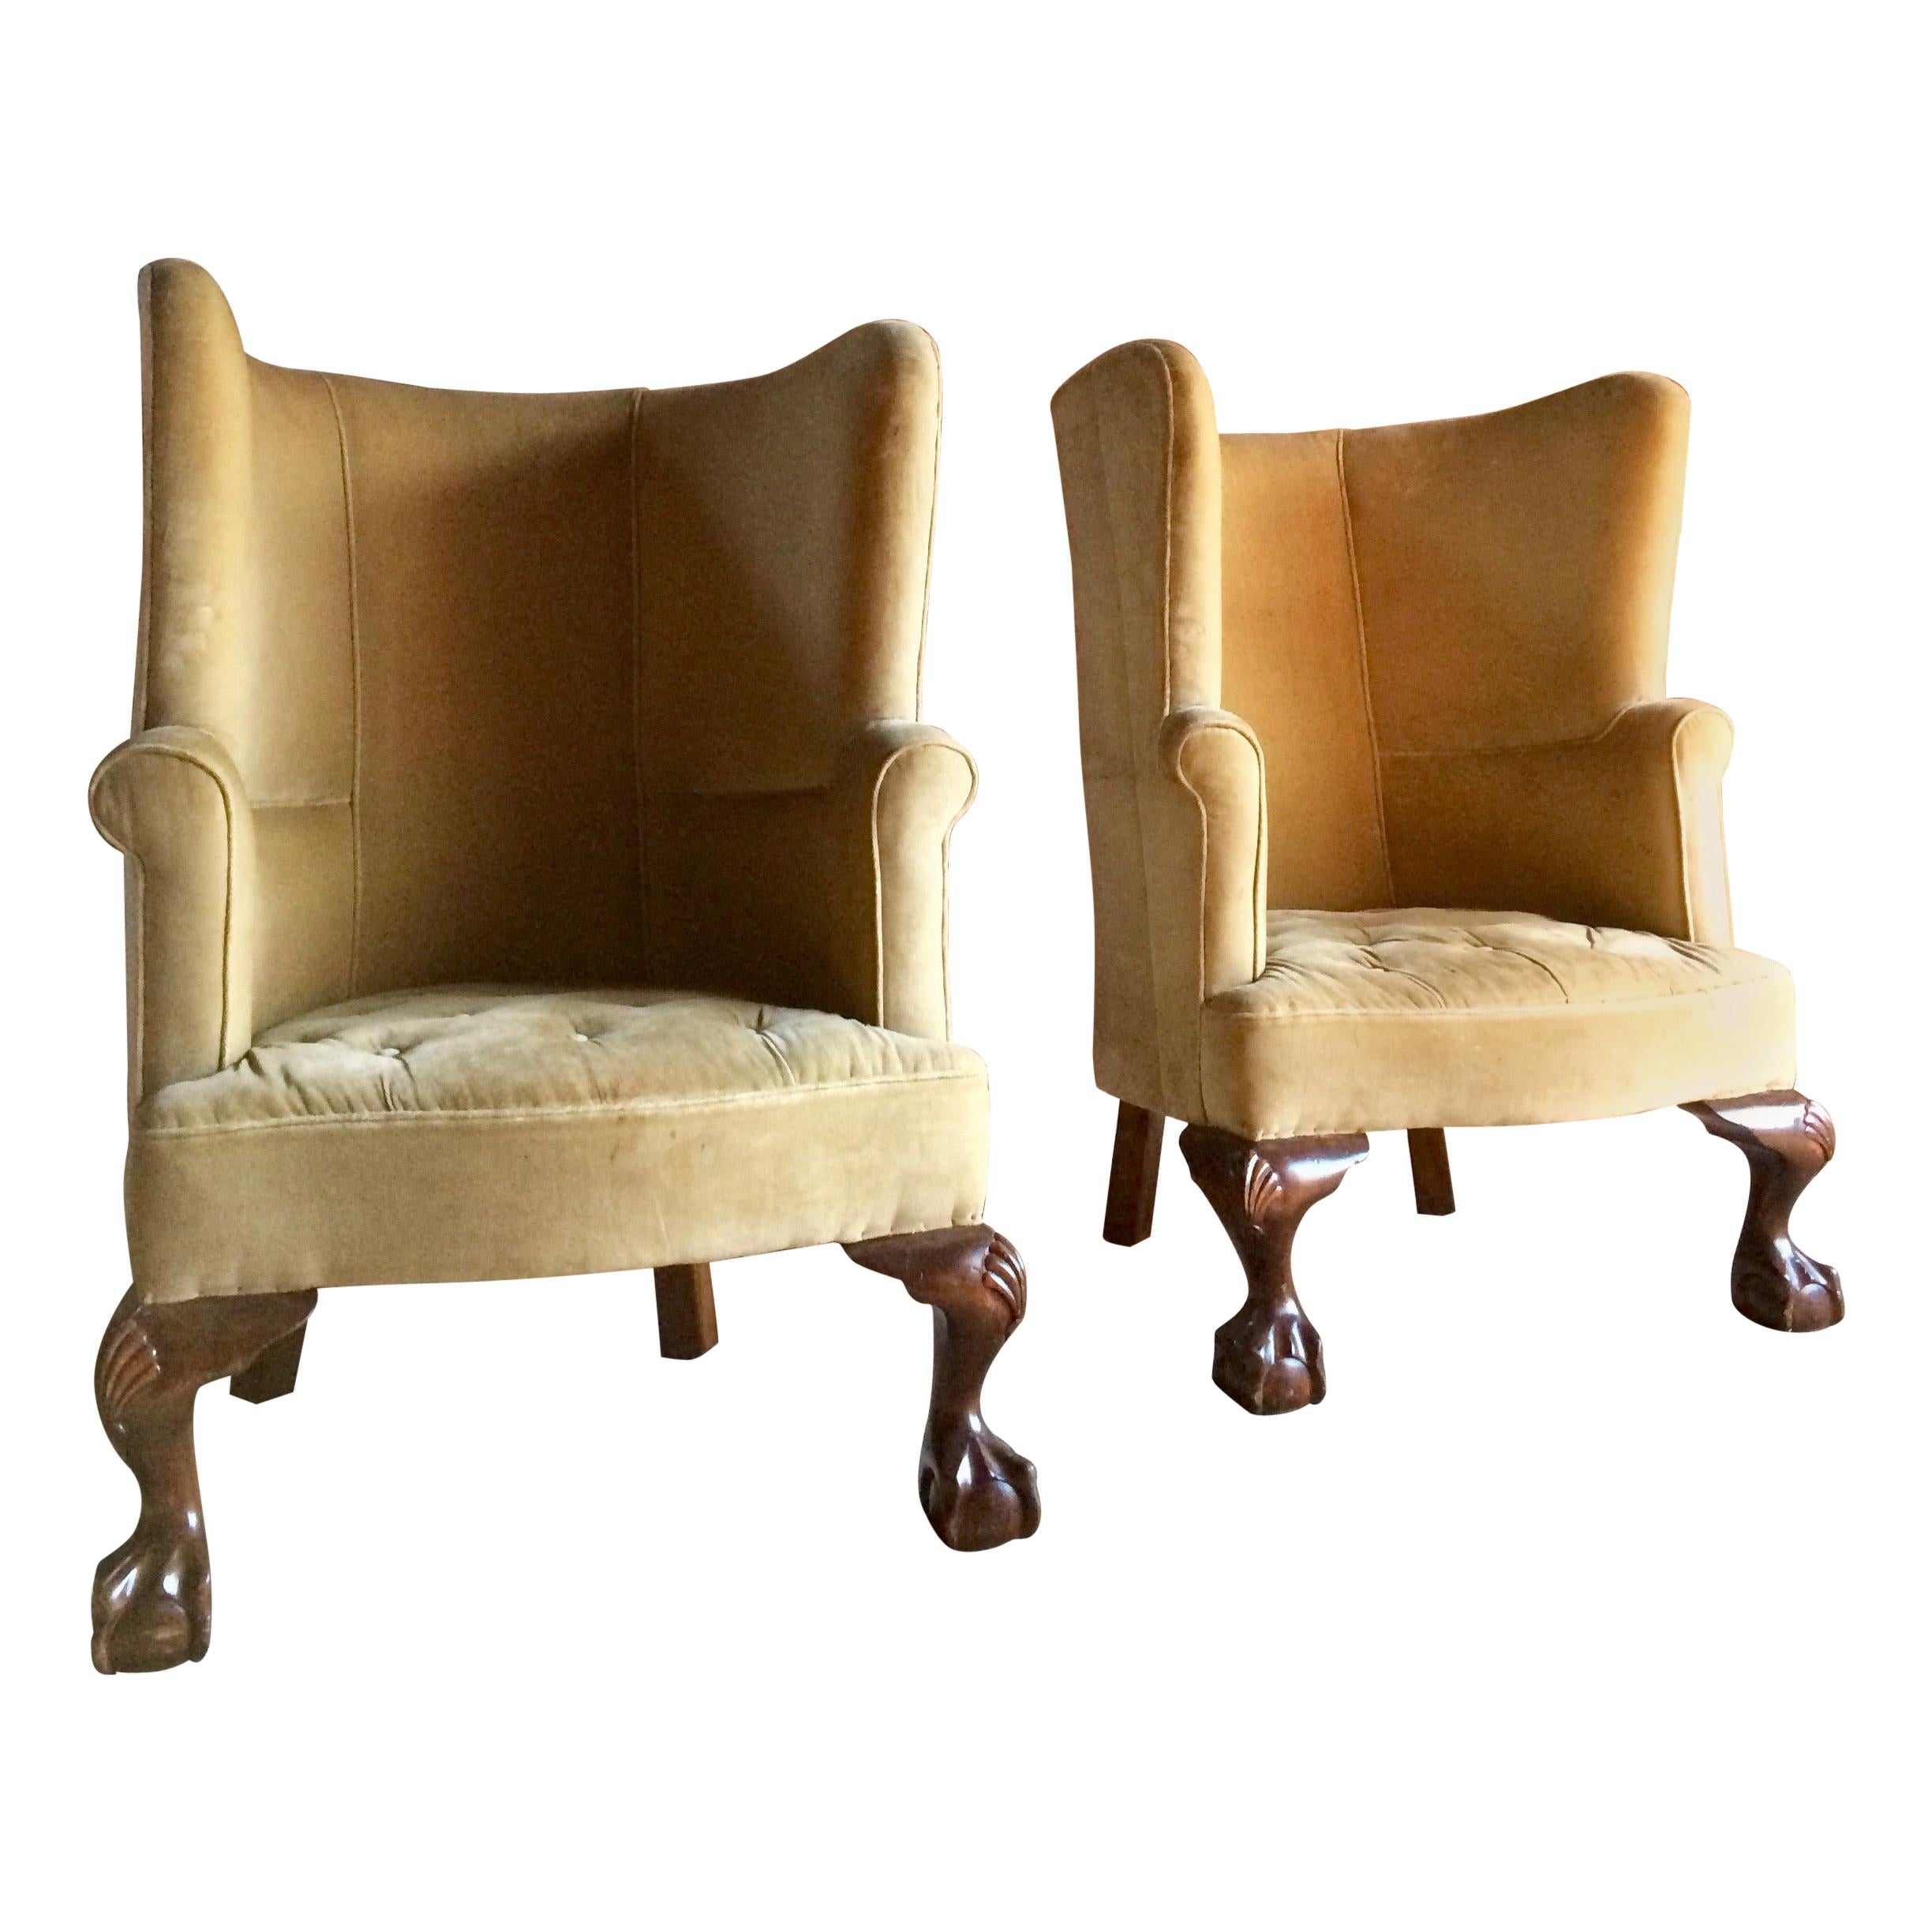 Antique Barrel Back Armchairs Porters Chairs Pair of George II Style, circa 1860